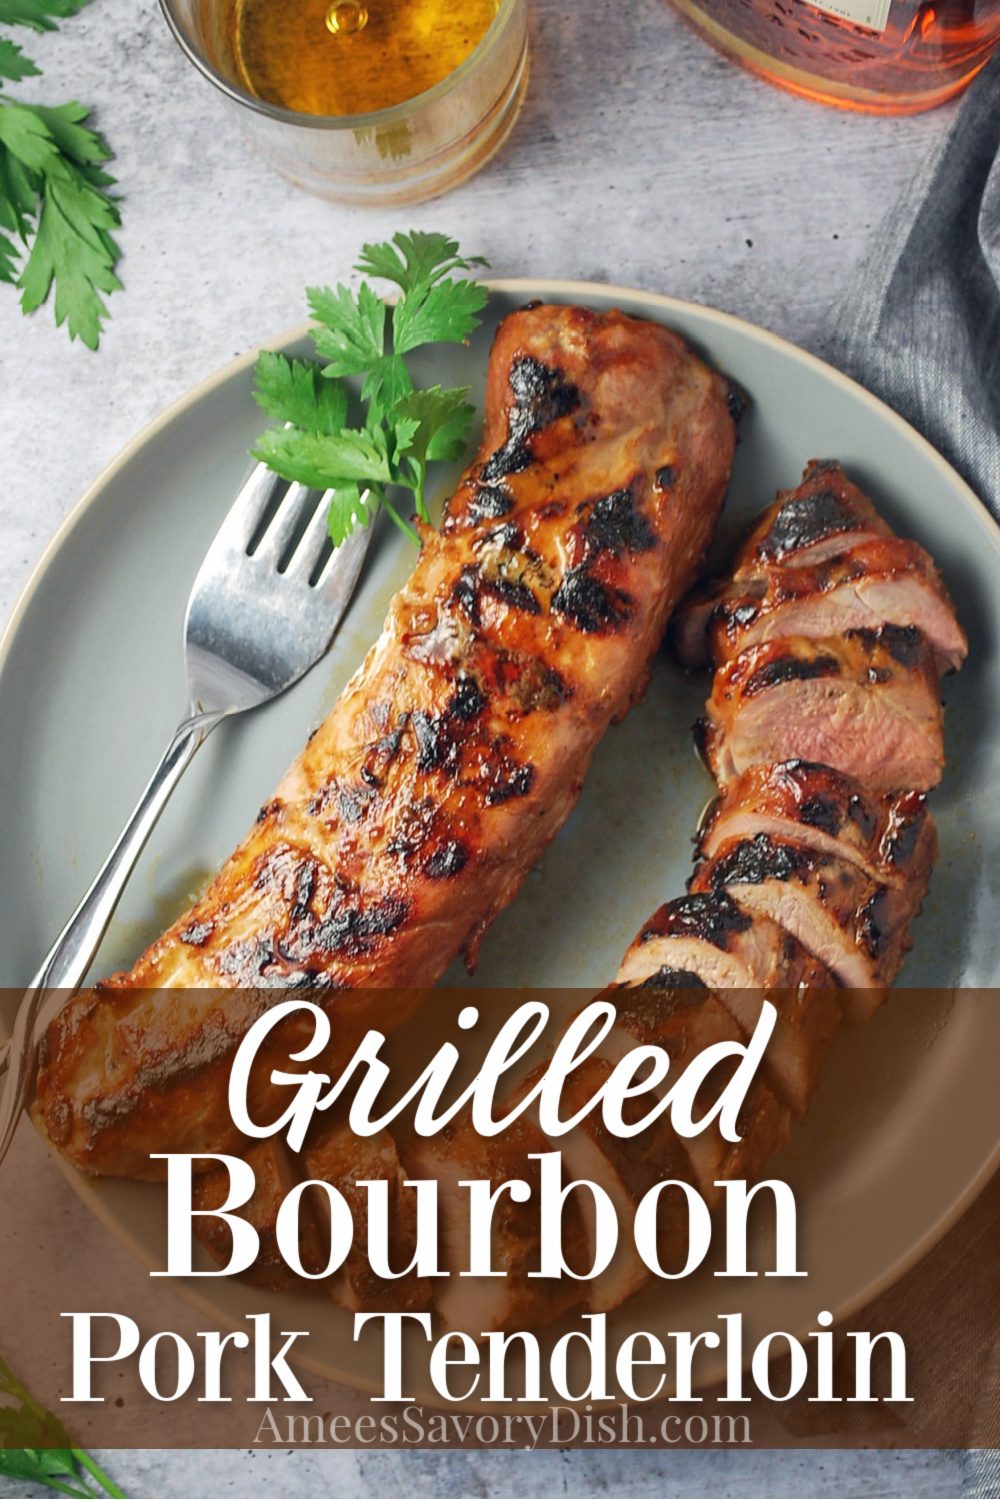 This grilled bourbon pork tenderloin is flavorful and easy made with Kentucky bourbon, soy sauce, brown sugar, garlic, dijon mustard, and spices.   This easy grill recipe is packed with protein and perfect for meal prep! #porktenderloin #grilledporktenderloin #bourbonpork #porkrecipe via @Ameessavorydish